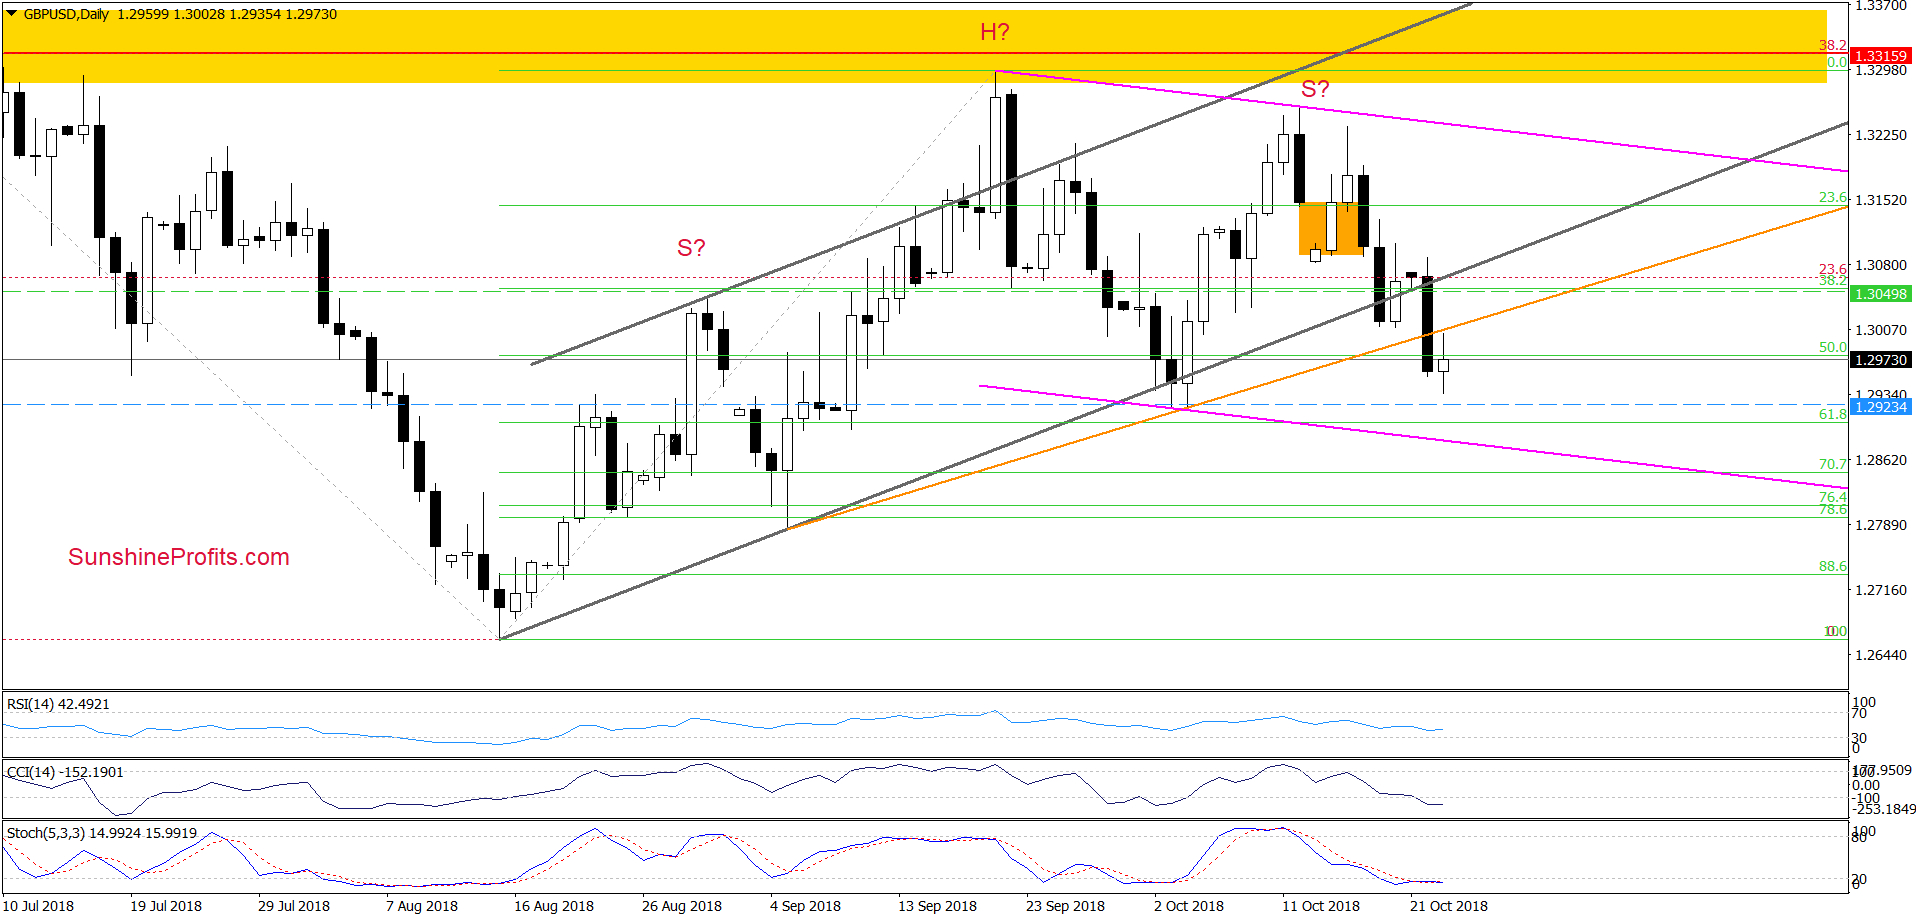 GBP/USD - daily chart